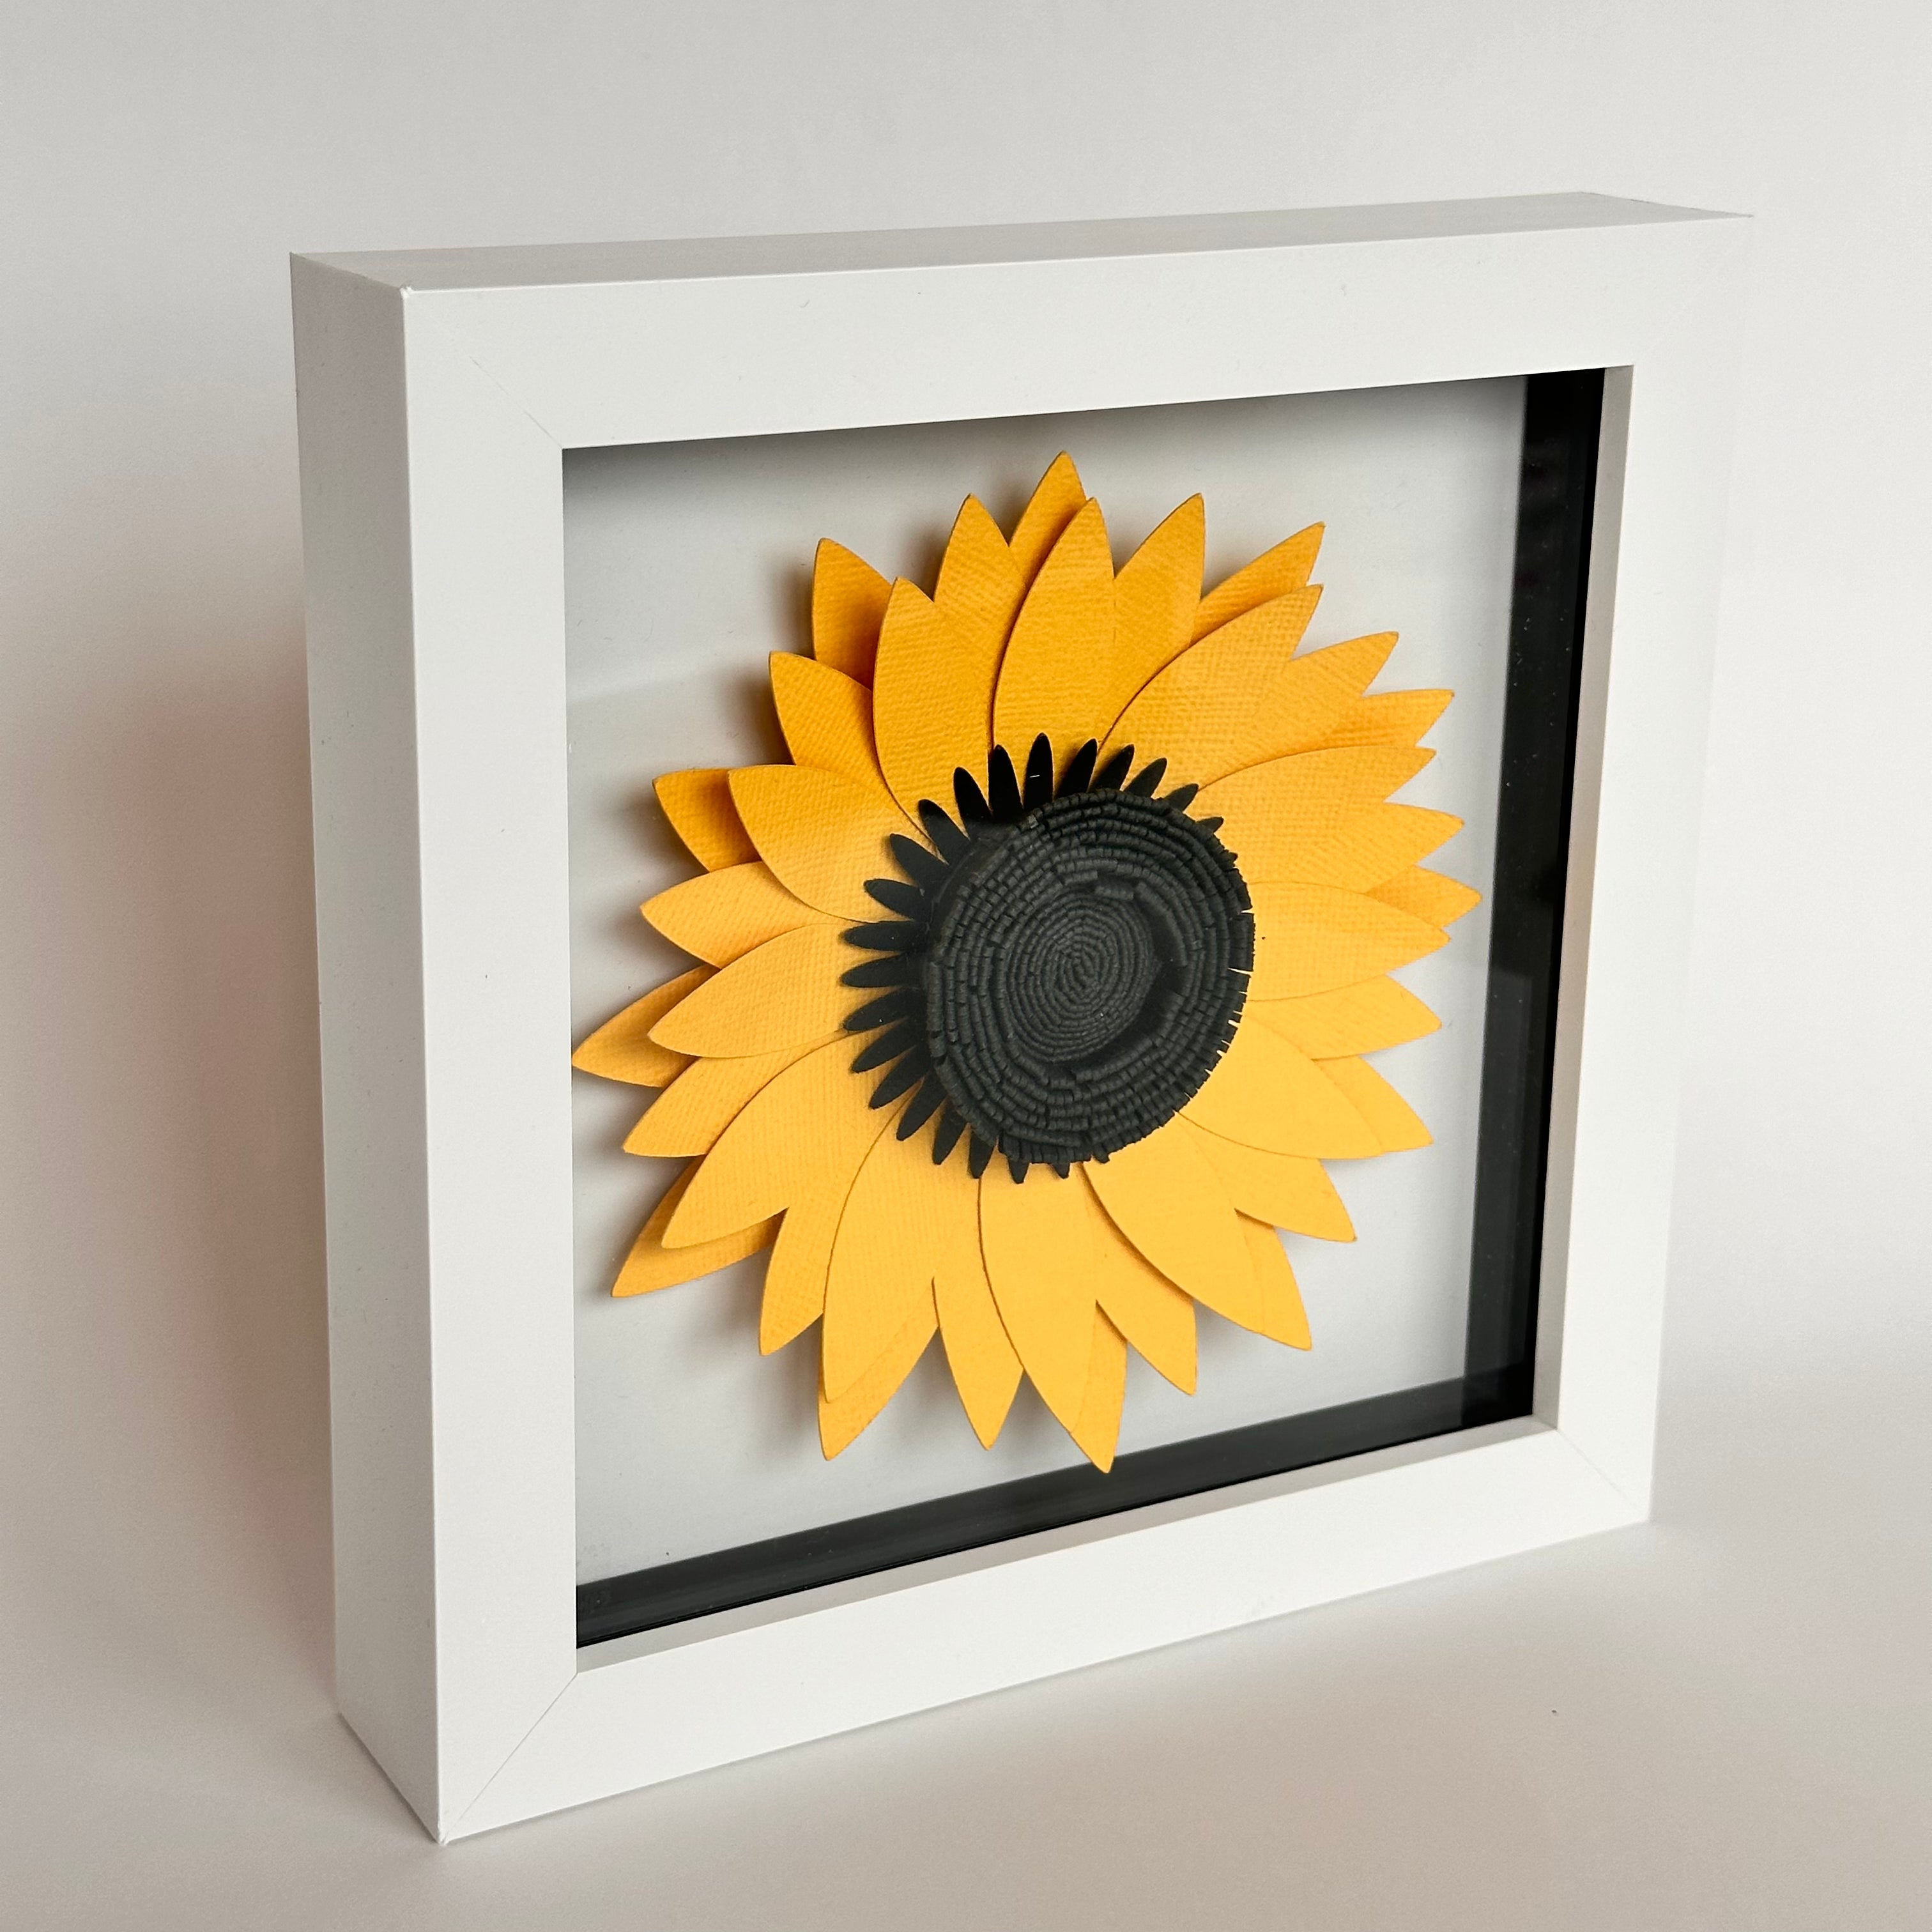 Shadow Boxes & Frames